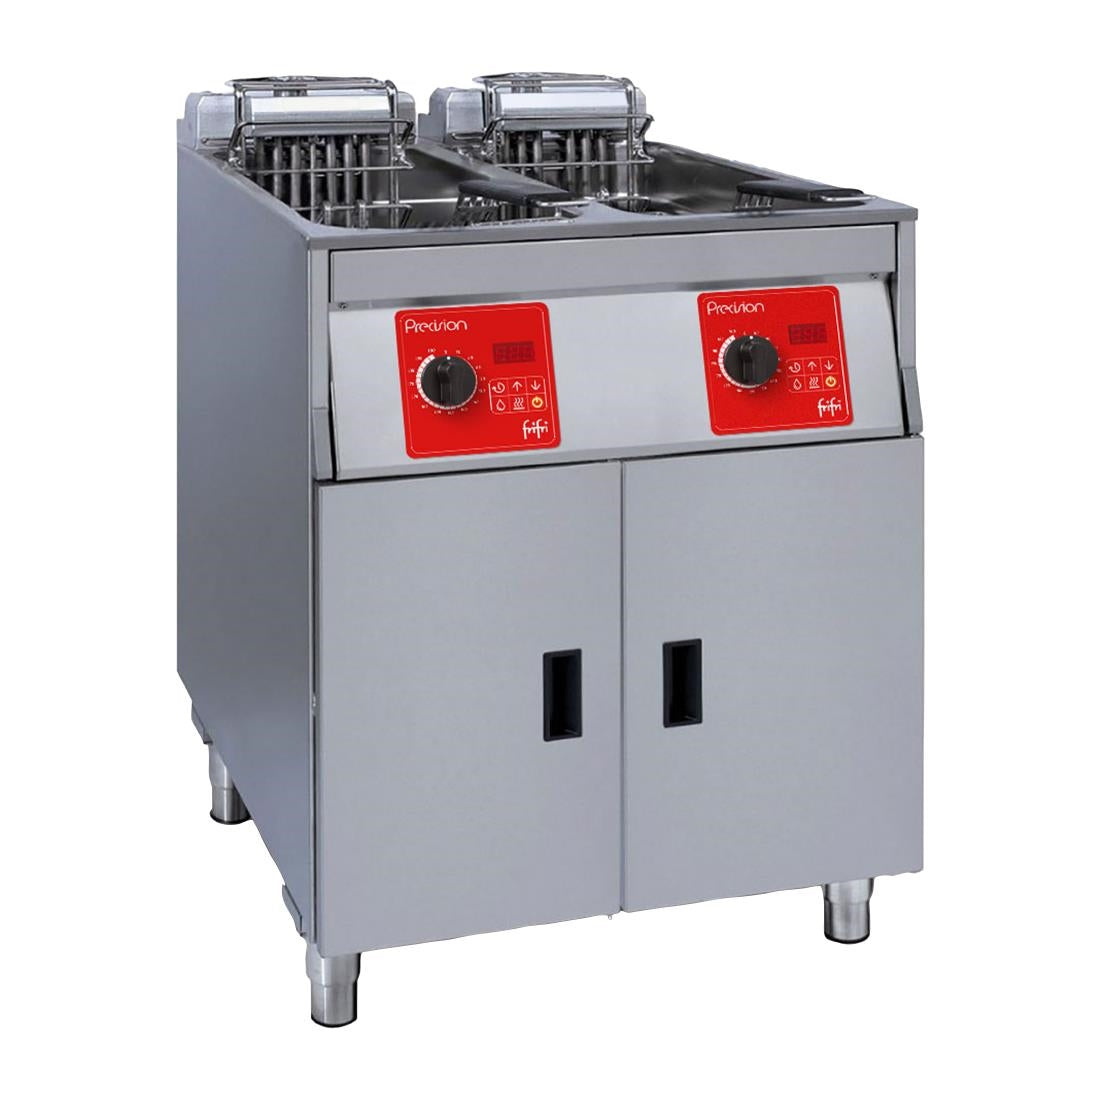 CX903 FriFri Precision 622 Electric Free Standing Twin Tank Filtration Fryer PL622H32G0 JD Catering Equipment Solutions Ltd